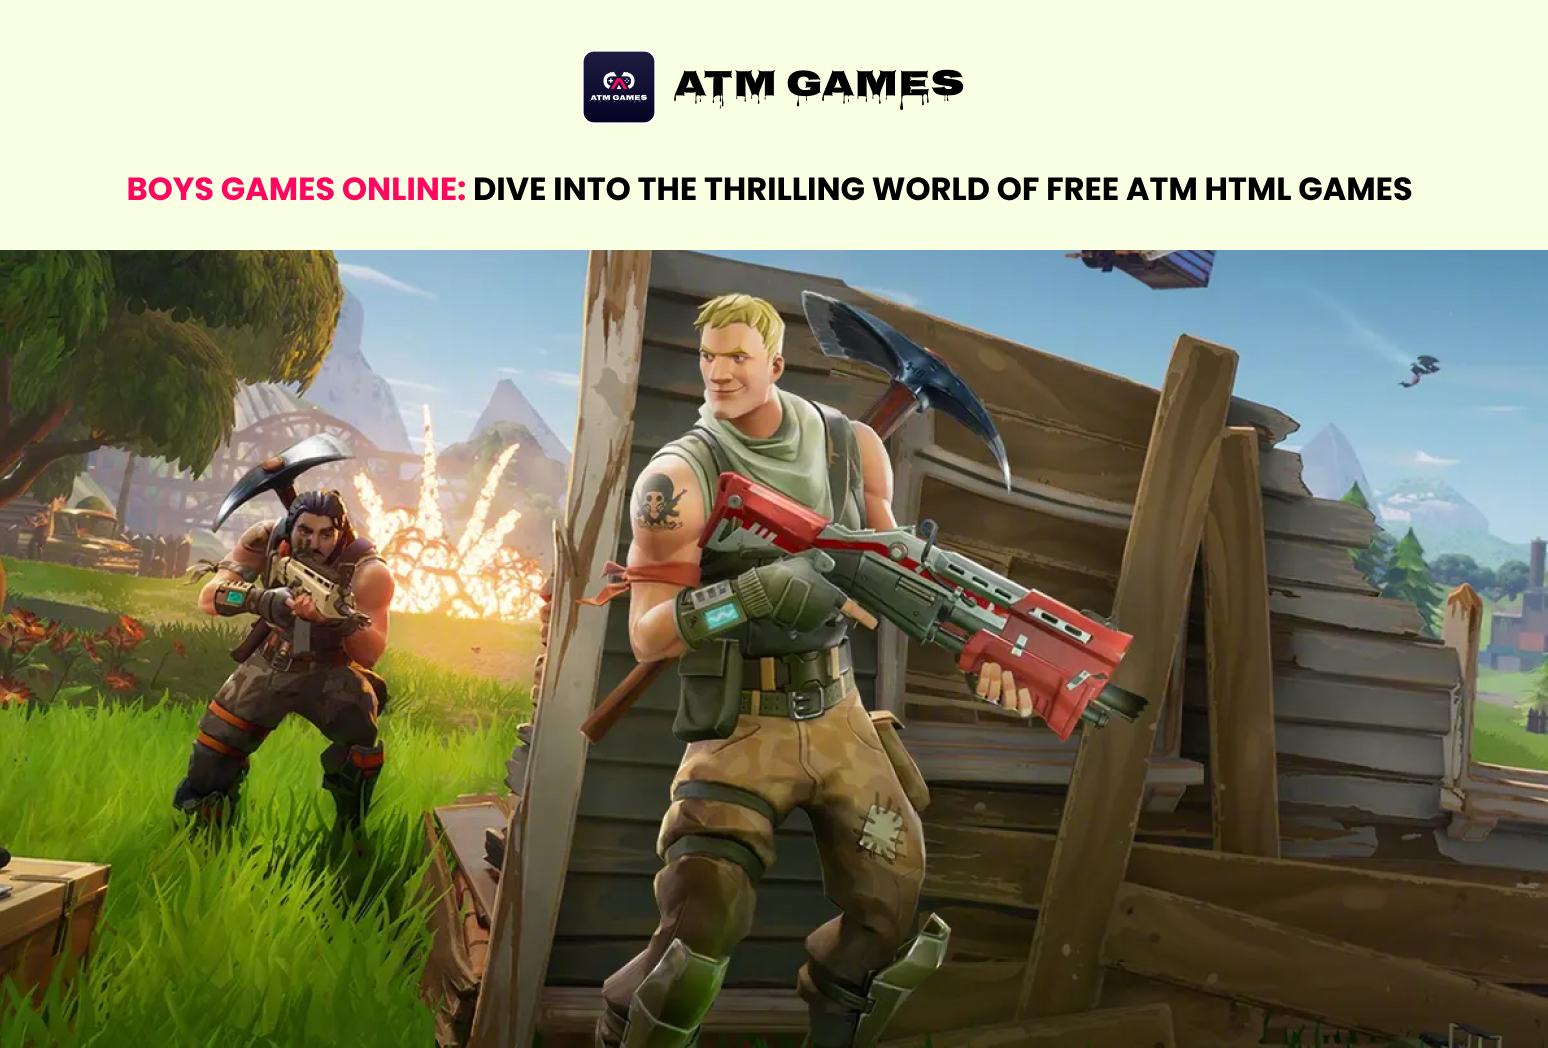 Boys Games Online: Dive into the Thrilling World of Free ATM HTML Games